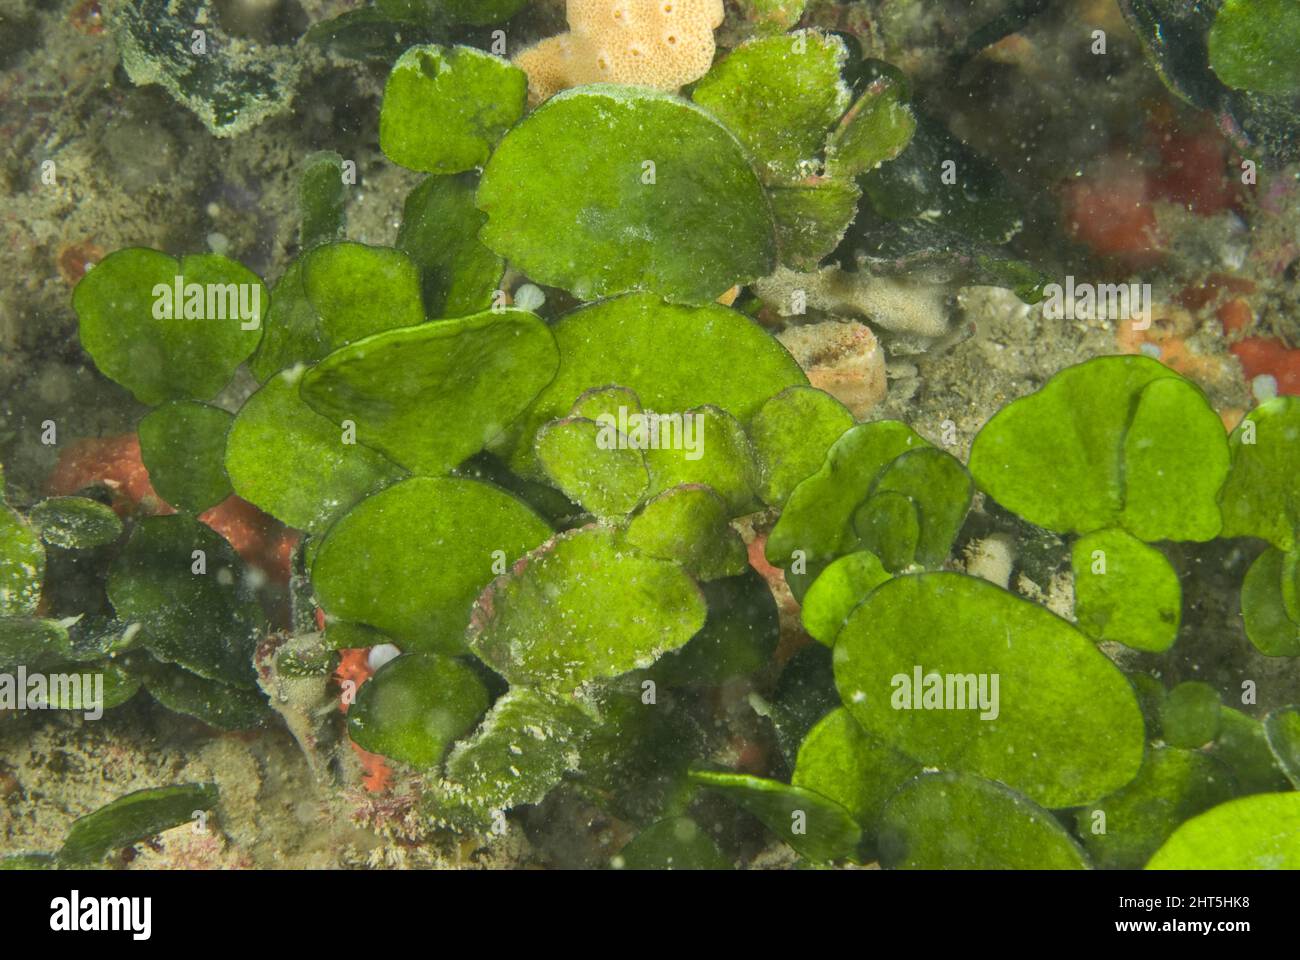 Halimeda green algae (Halimeda cuneata). A large amount of almost white sand is associated with coral reefs, some being produced by Halimeda algae. Stock Photo